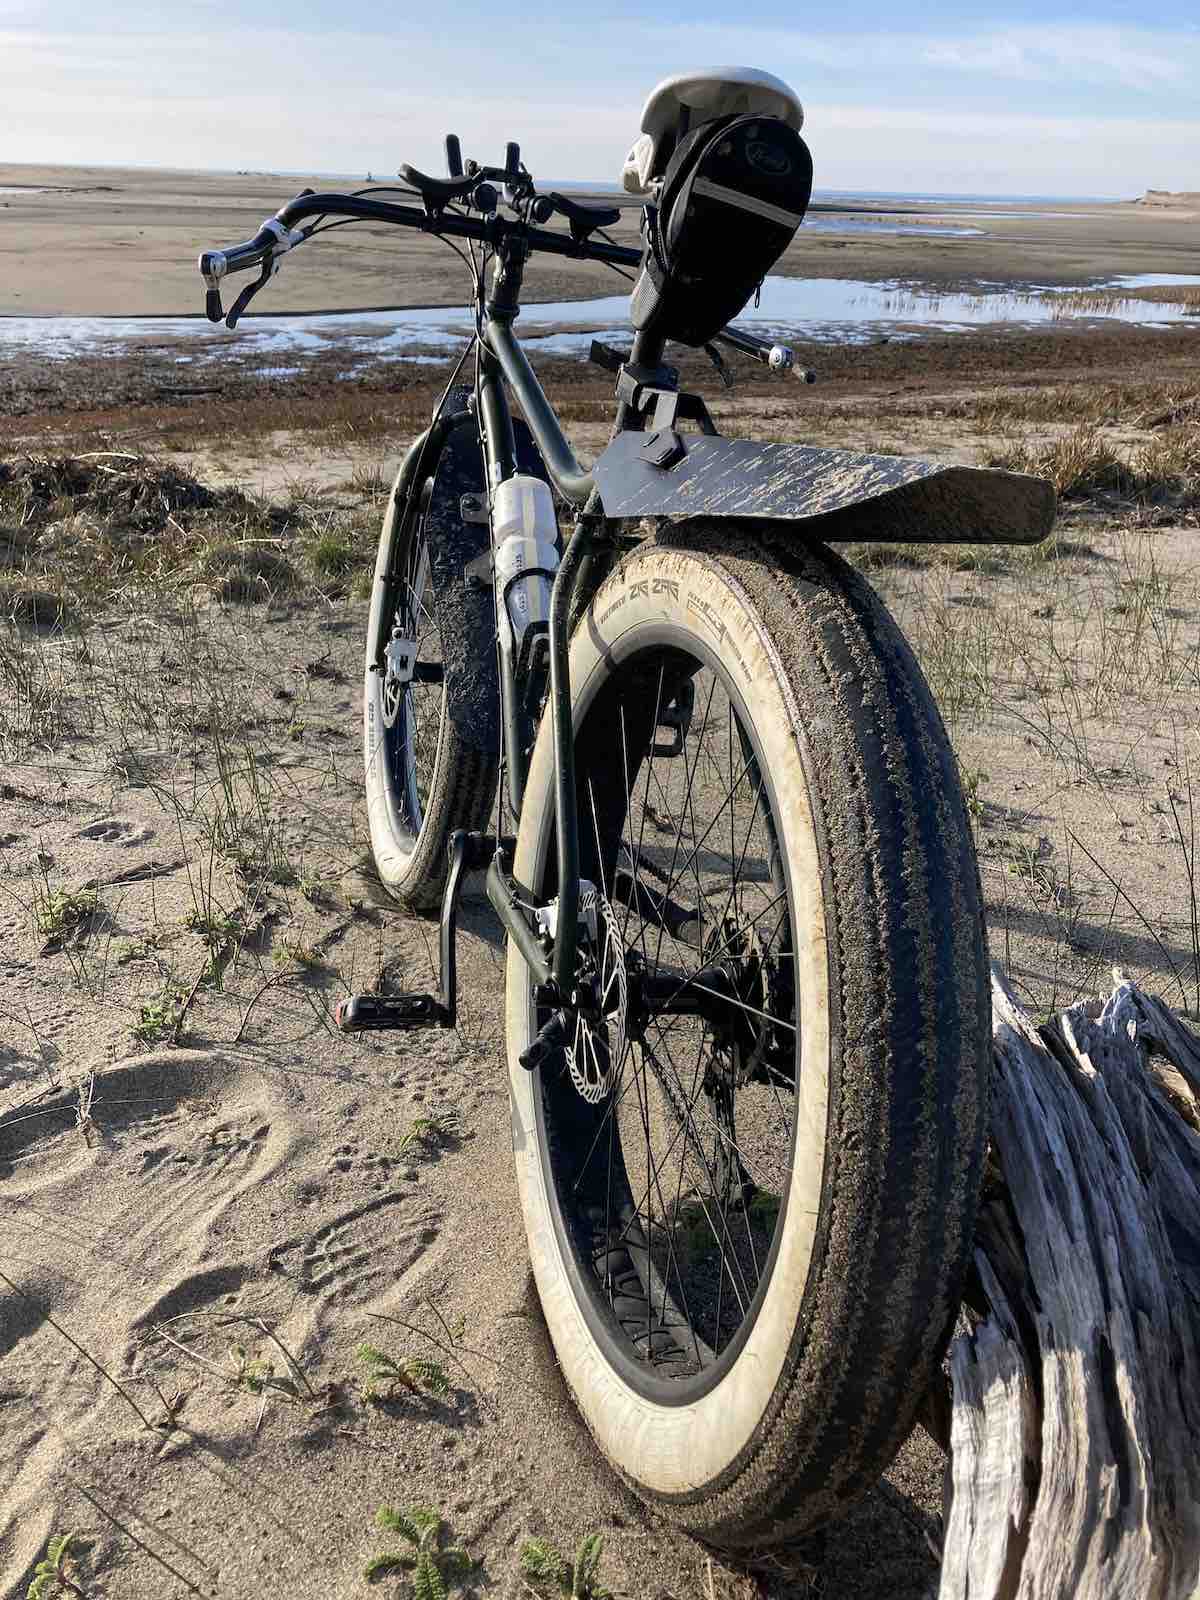 bikerumor pic of the day a fat bike in the mud on the edge of a river as it meets the sea.